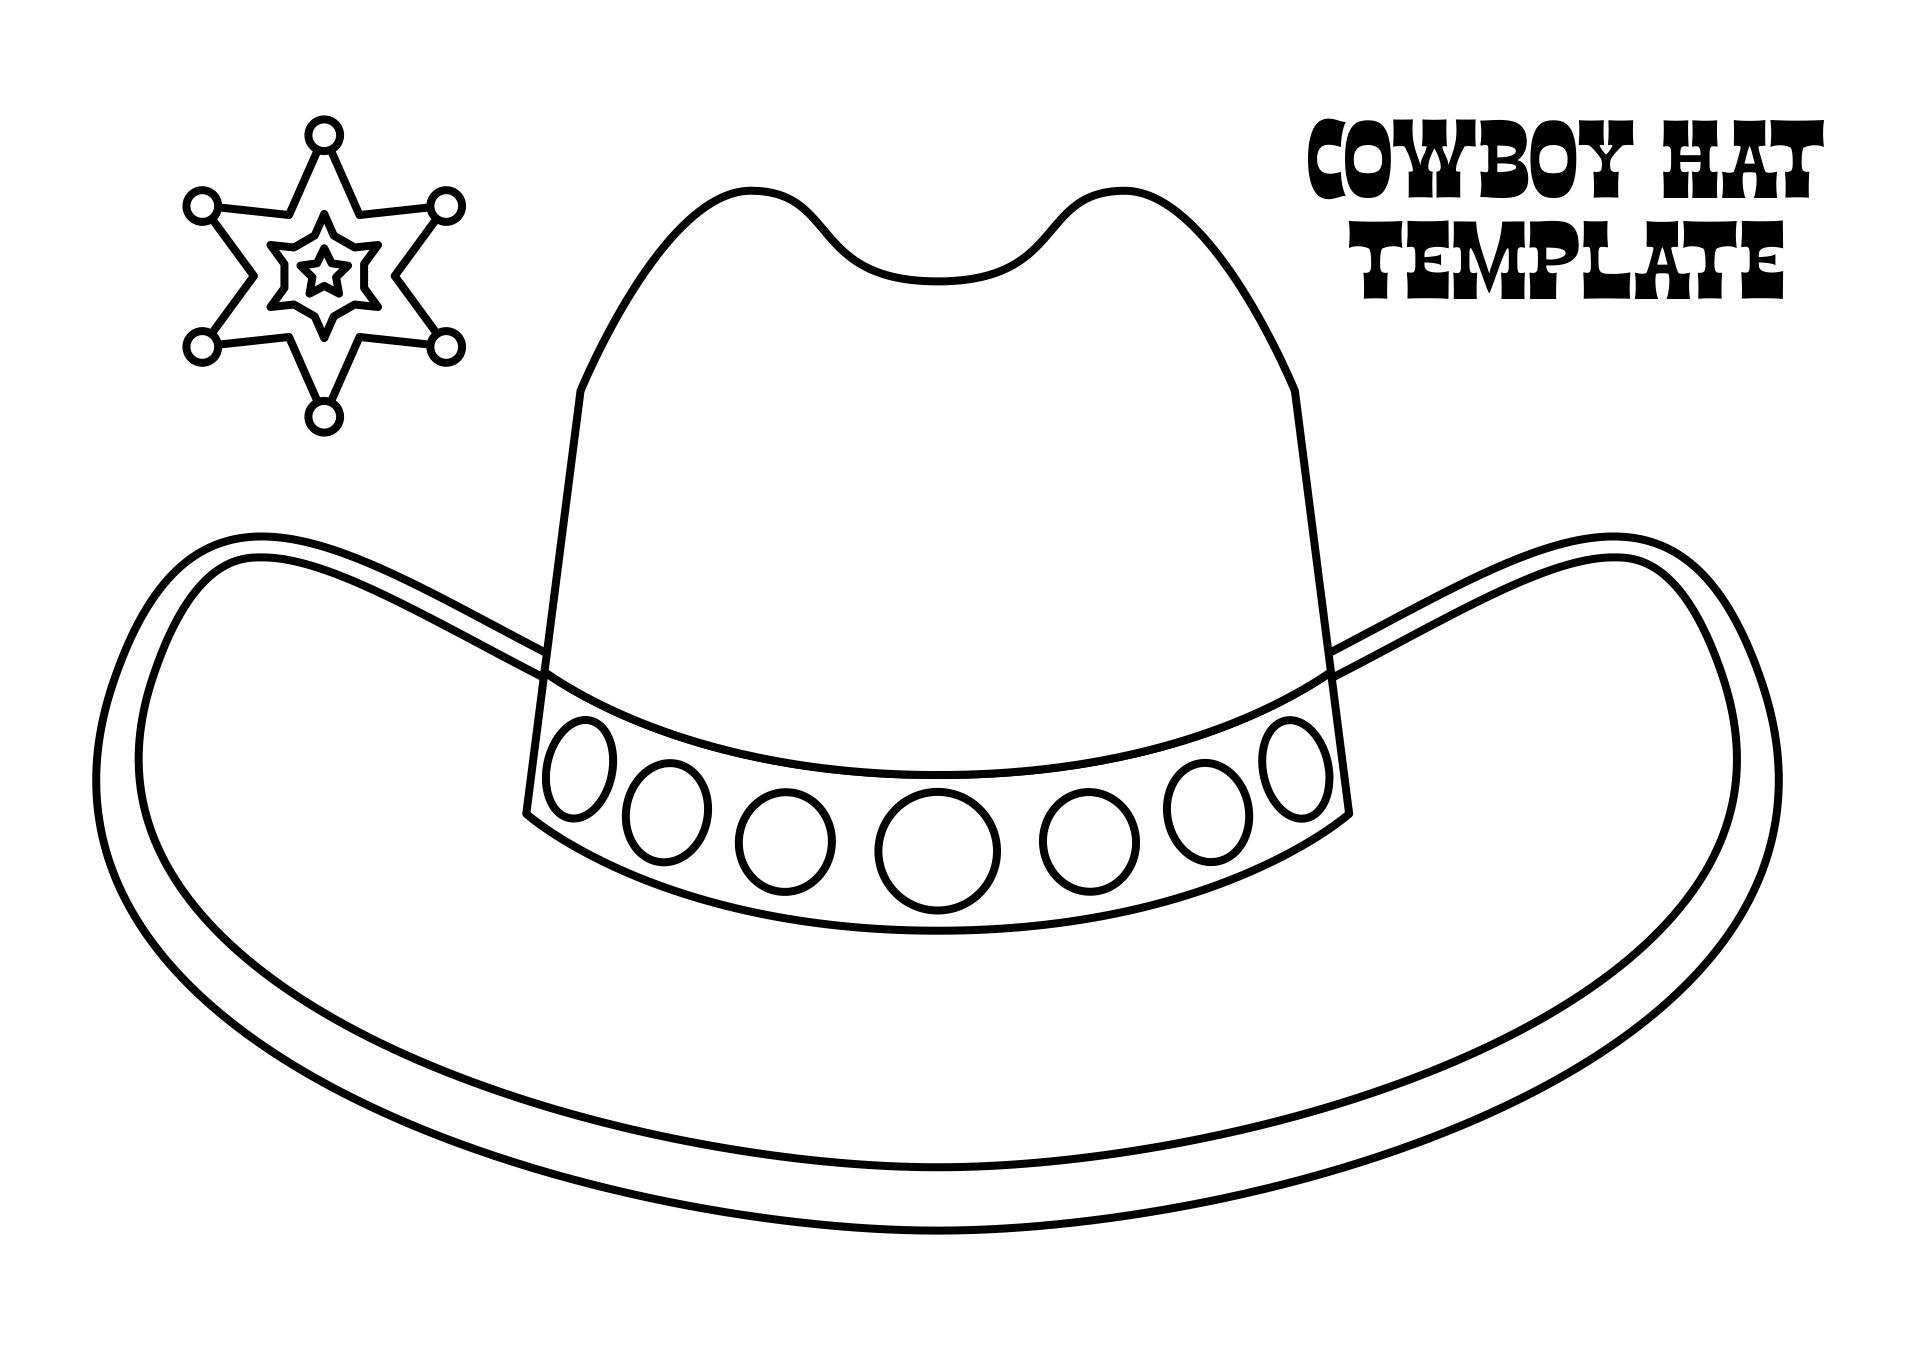 7-best-images-of-cowboy-hat-printable-template-cowboy-hat-applique-design-cowboy-printable